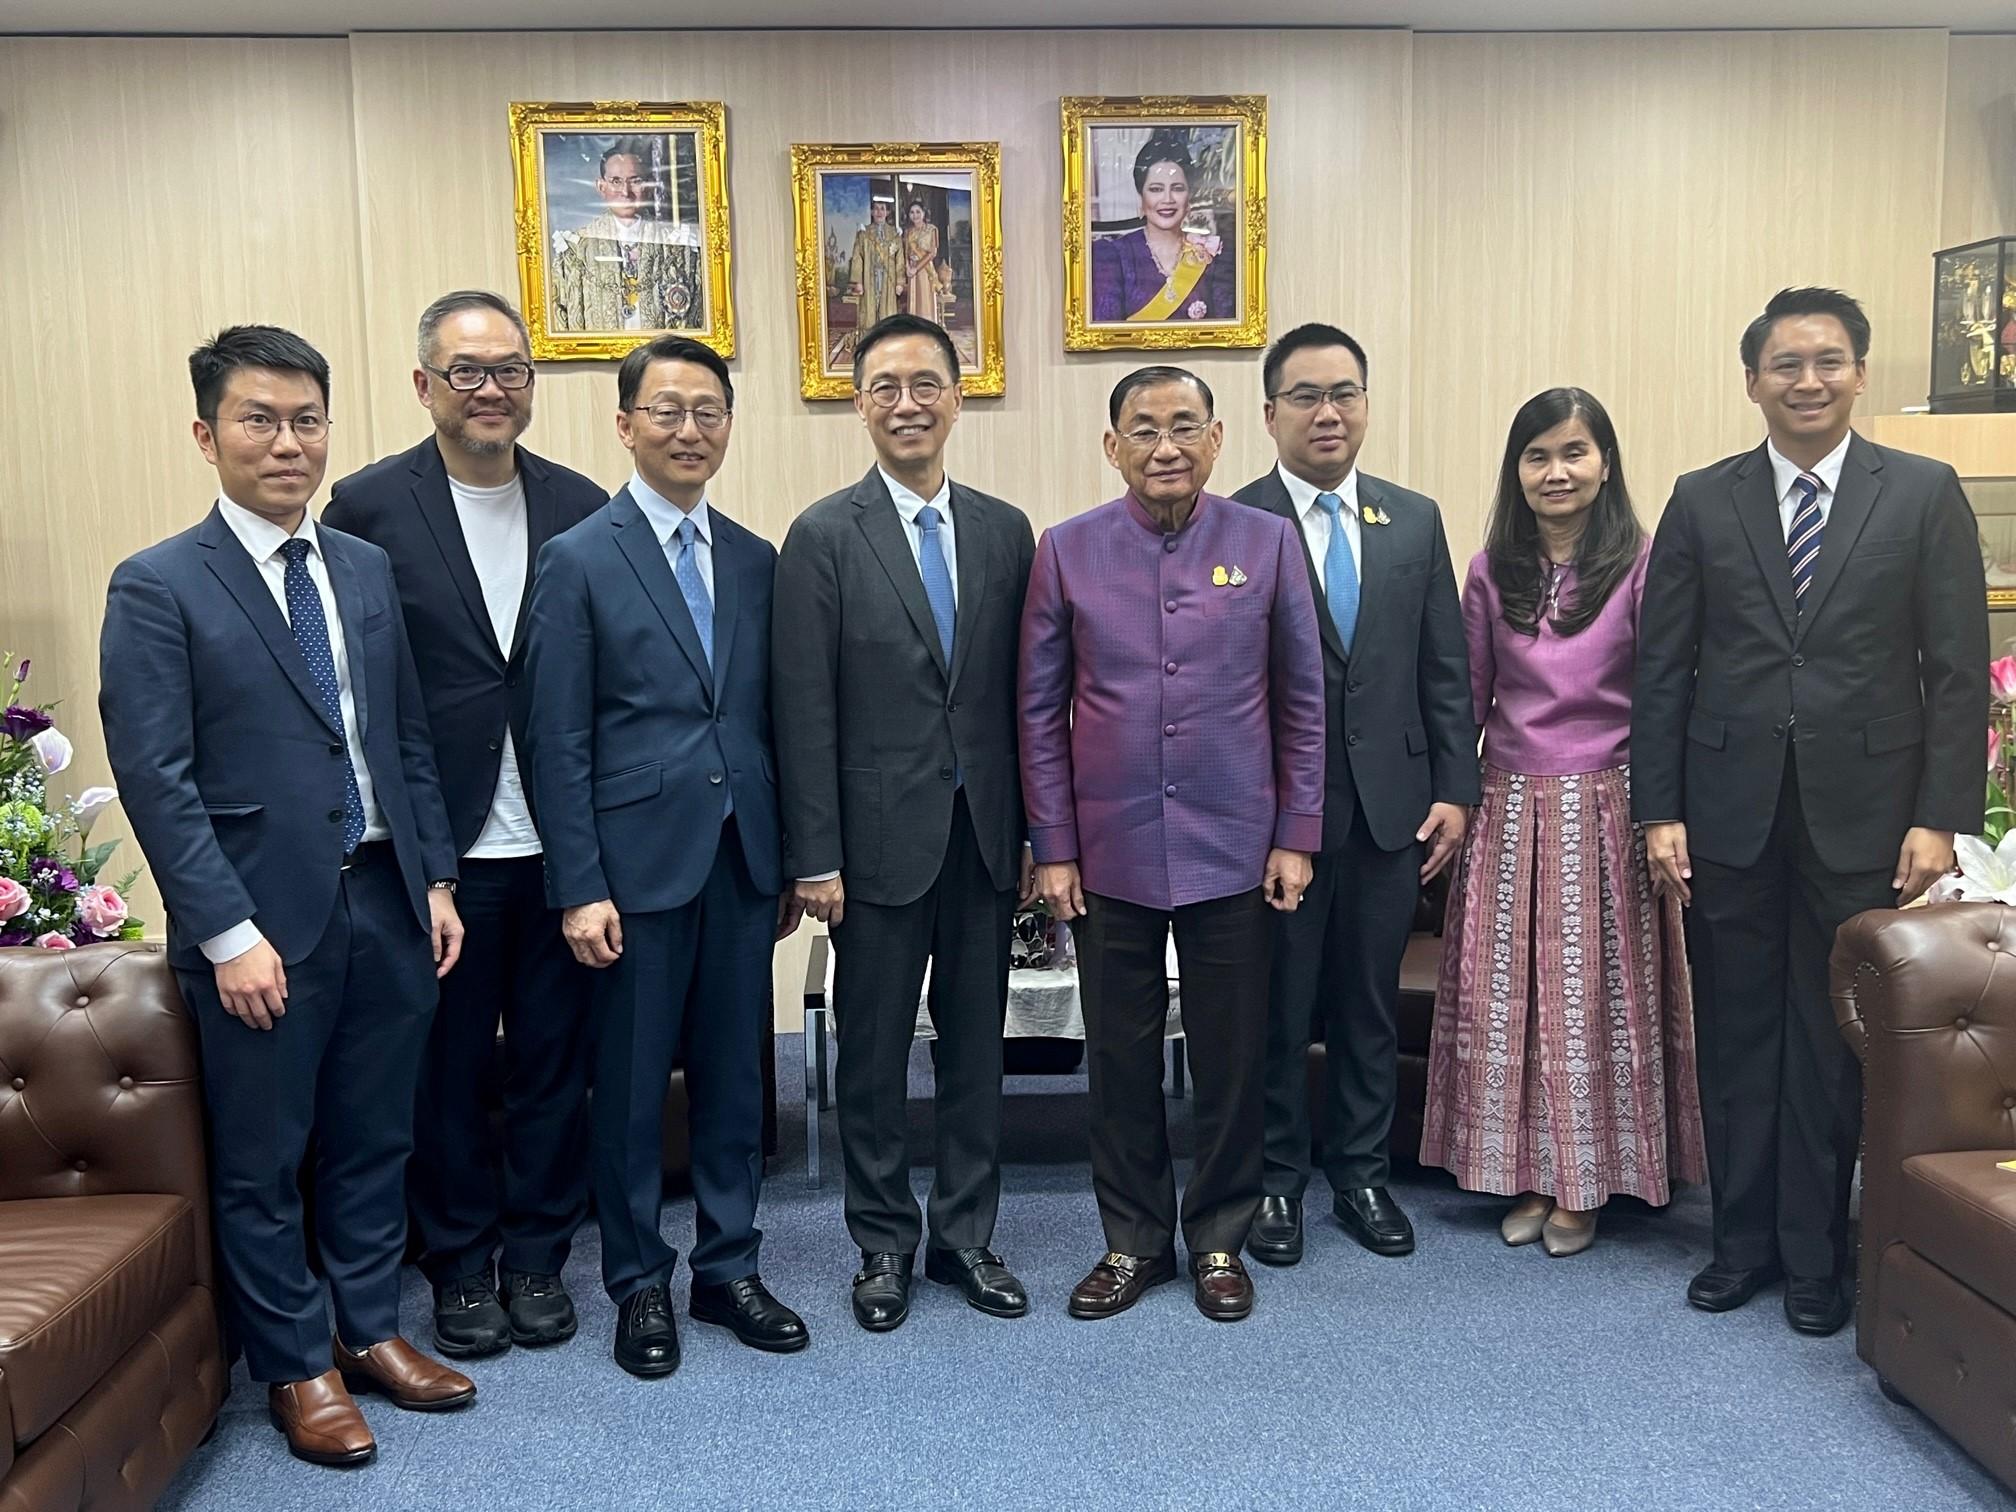 Accompanied by the Director of Leisure and Cultural Services, Mr Vincent Liu (third left), and the Head of Create Hong Kong, Mr Victor Tsang (second left), the Secretary for Culture, Sports and Tourism, Mr Kevin Yeung (fourth left), met with the Minister of Culture of Thailand, Mr Sermsak Pongpanit (fourth right), in Bangkok this afternoon (October 20).